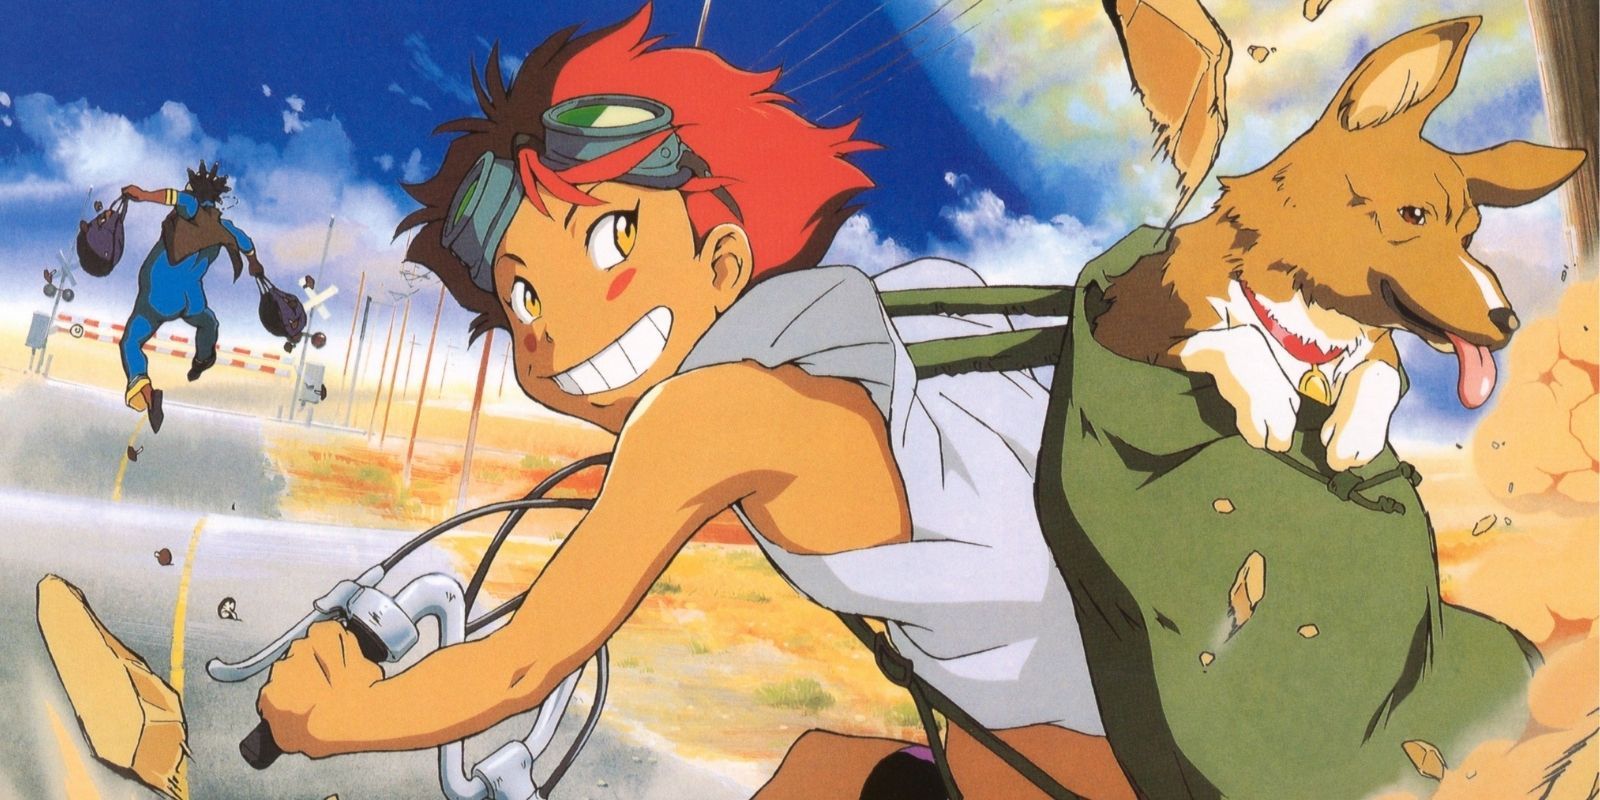 Cowboy Bebop's Ed frantically riding a scooter with Ein the Corgi in tow